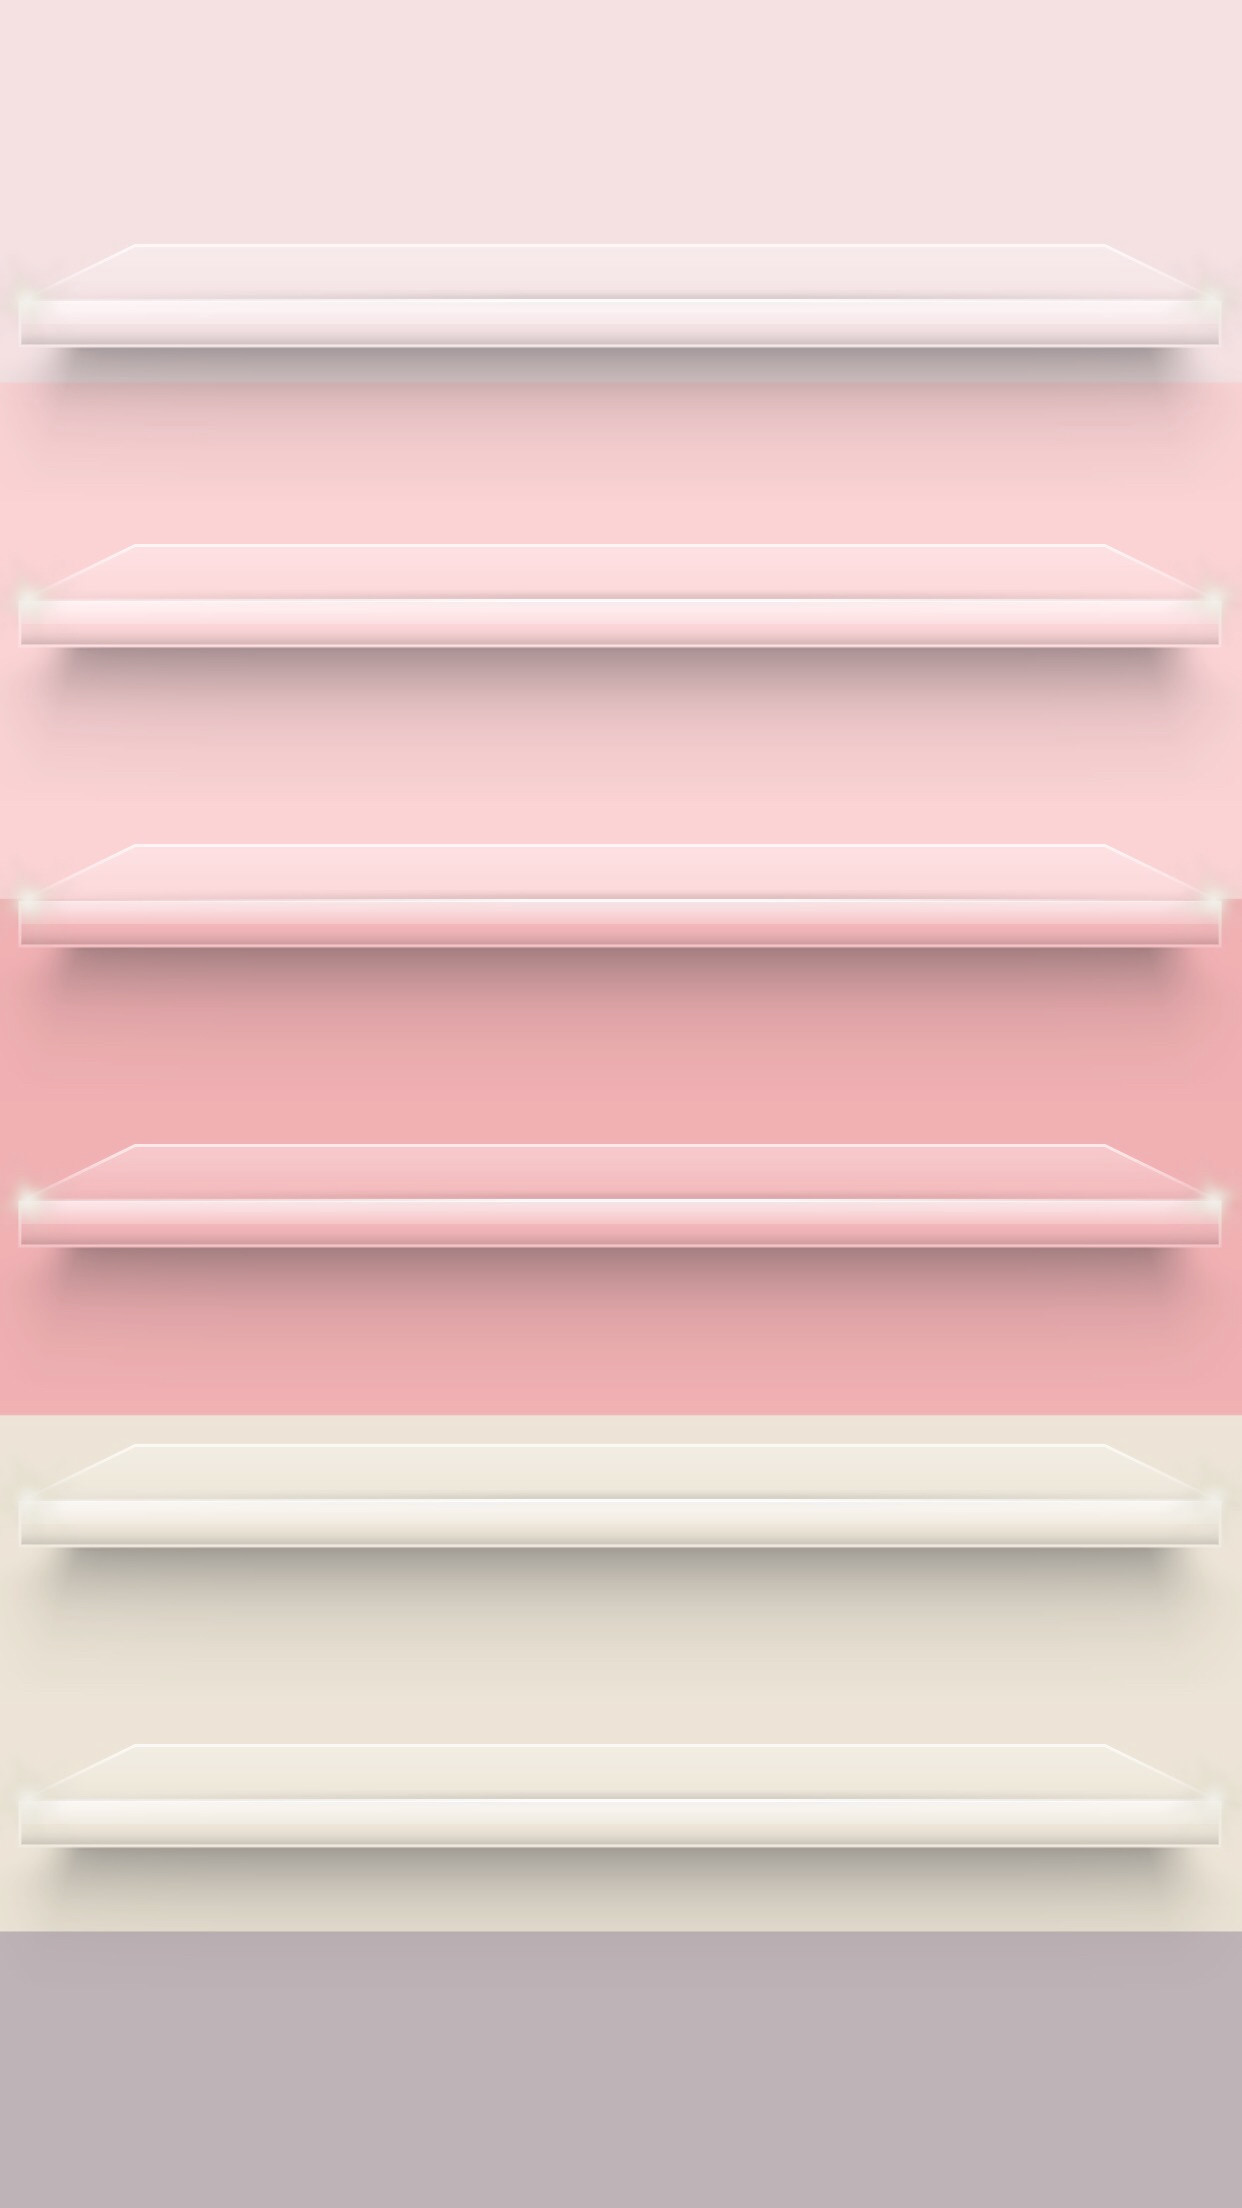 1242x2208 iPhone wallpaper. See More. Striped home screen